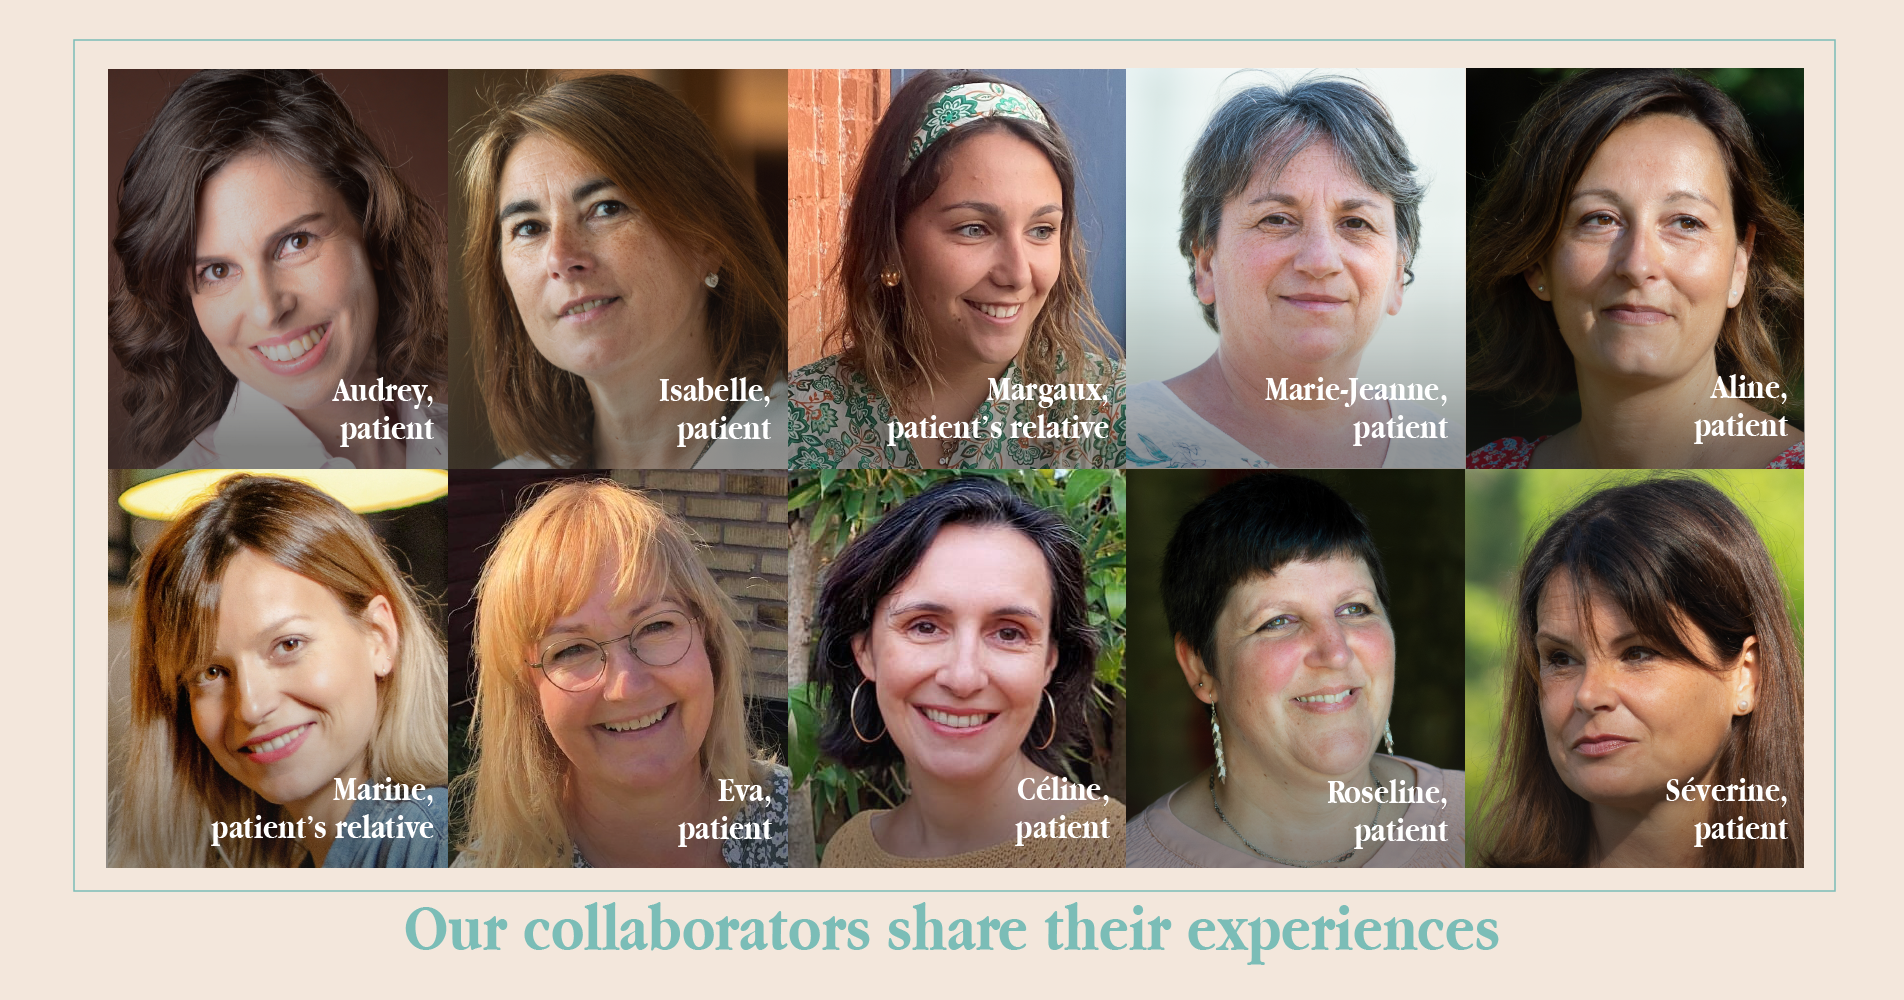 Our collaborators share their experience